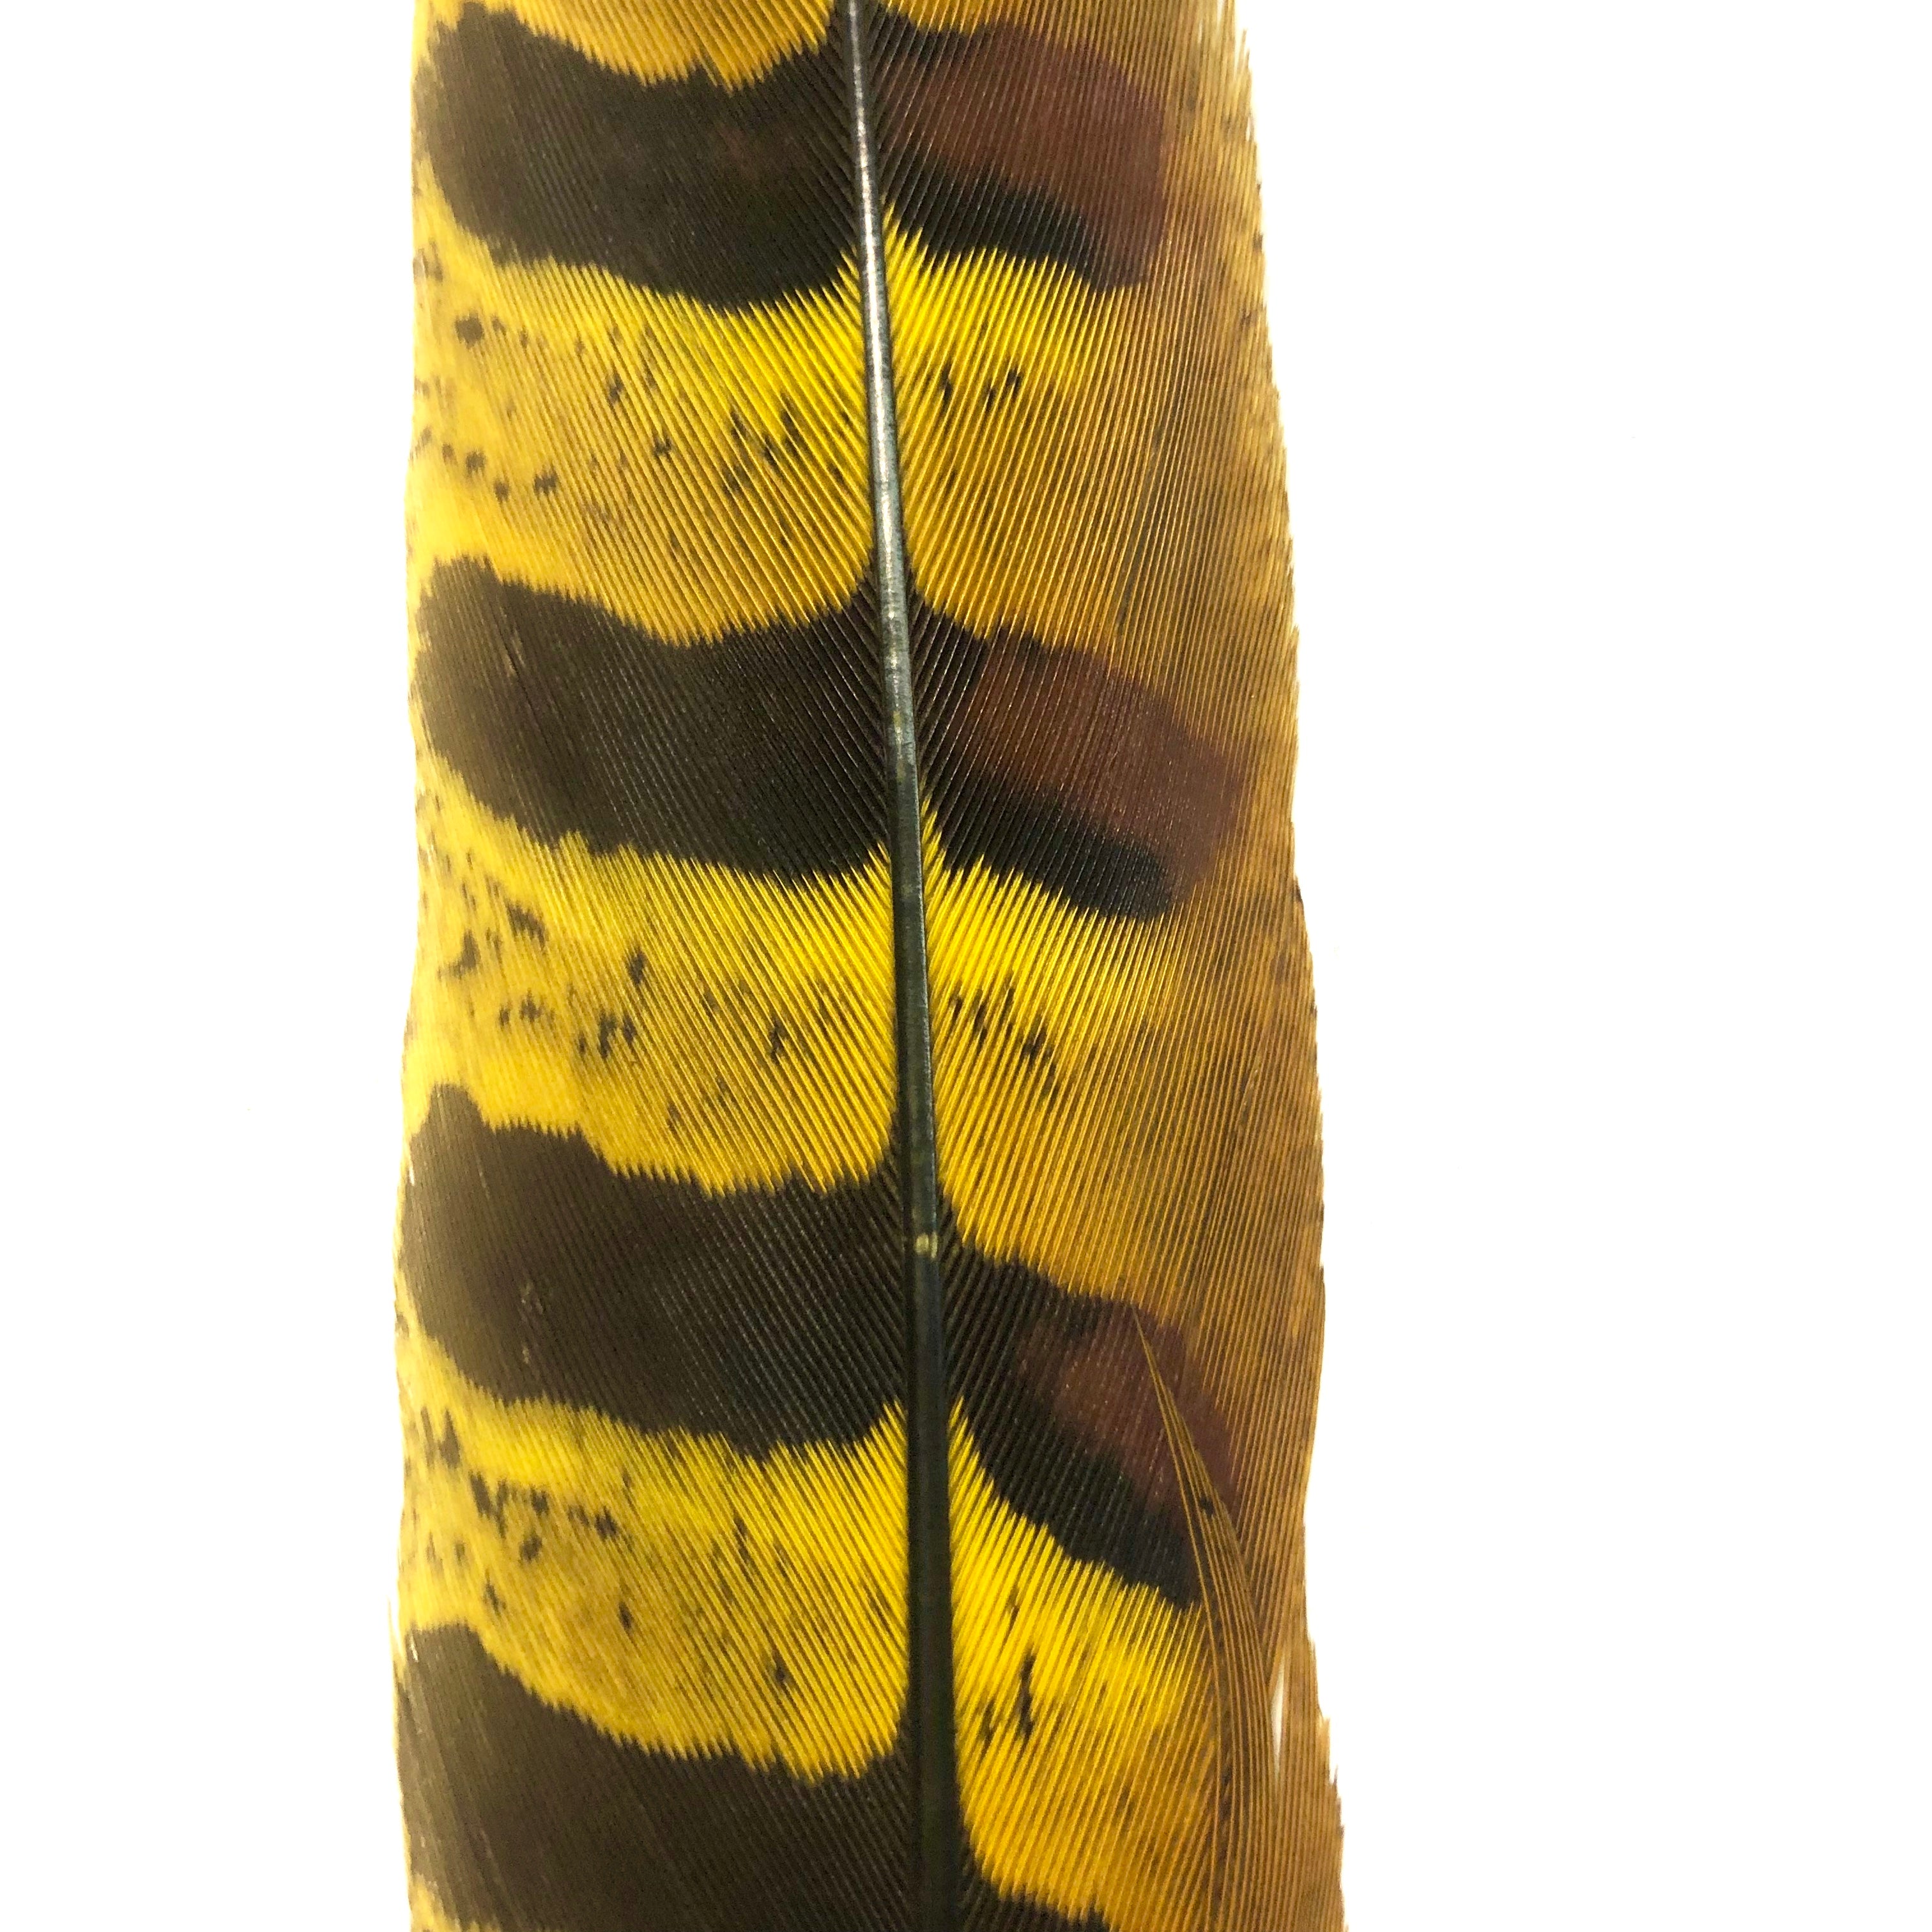 12" to 14" Reeves Pheasant Tail Feather - Yellow ((SECONDS))